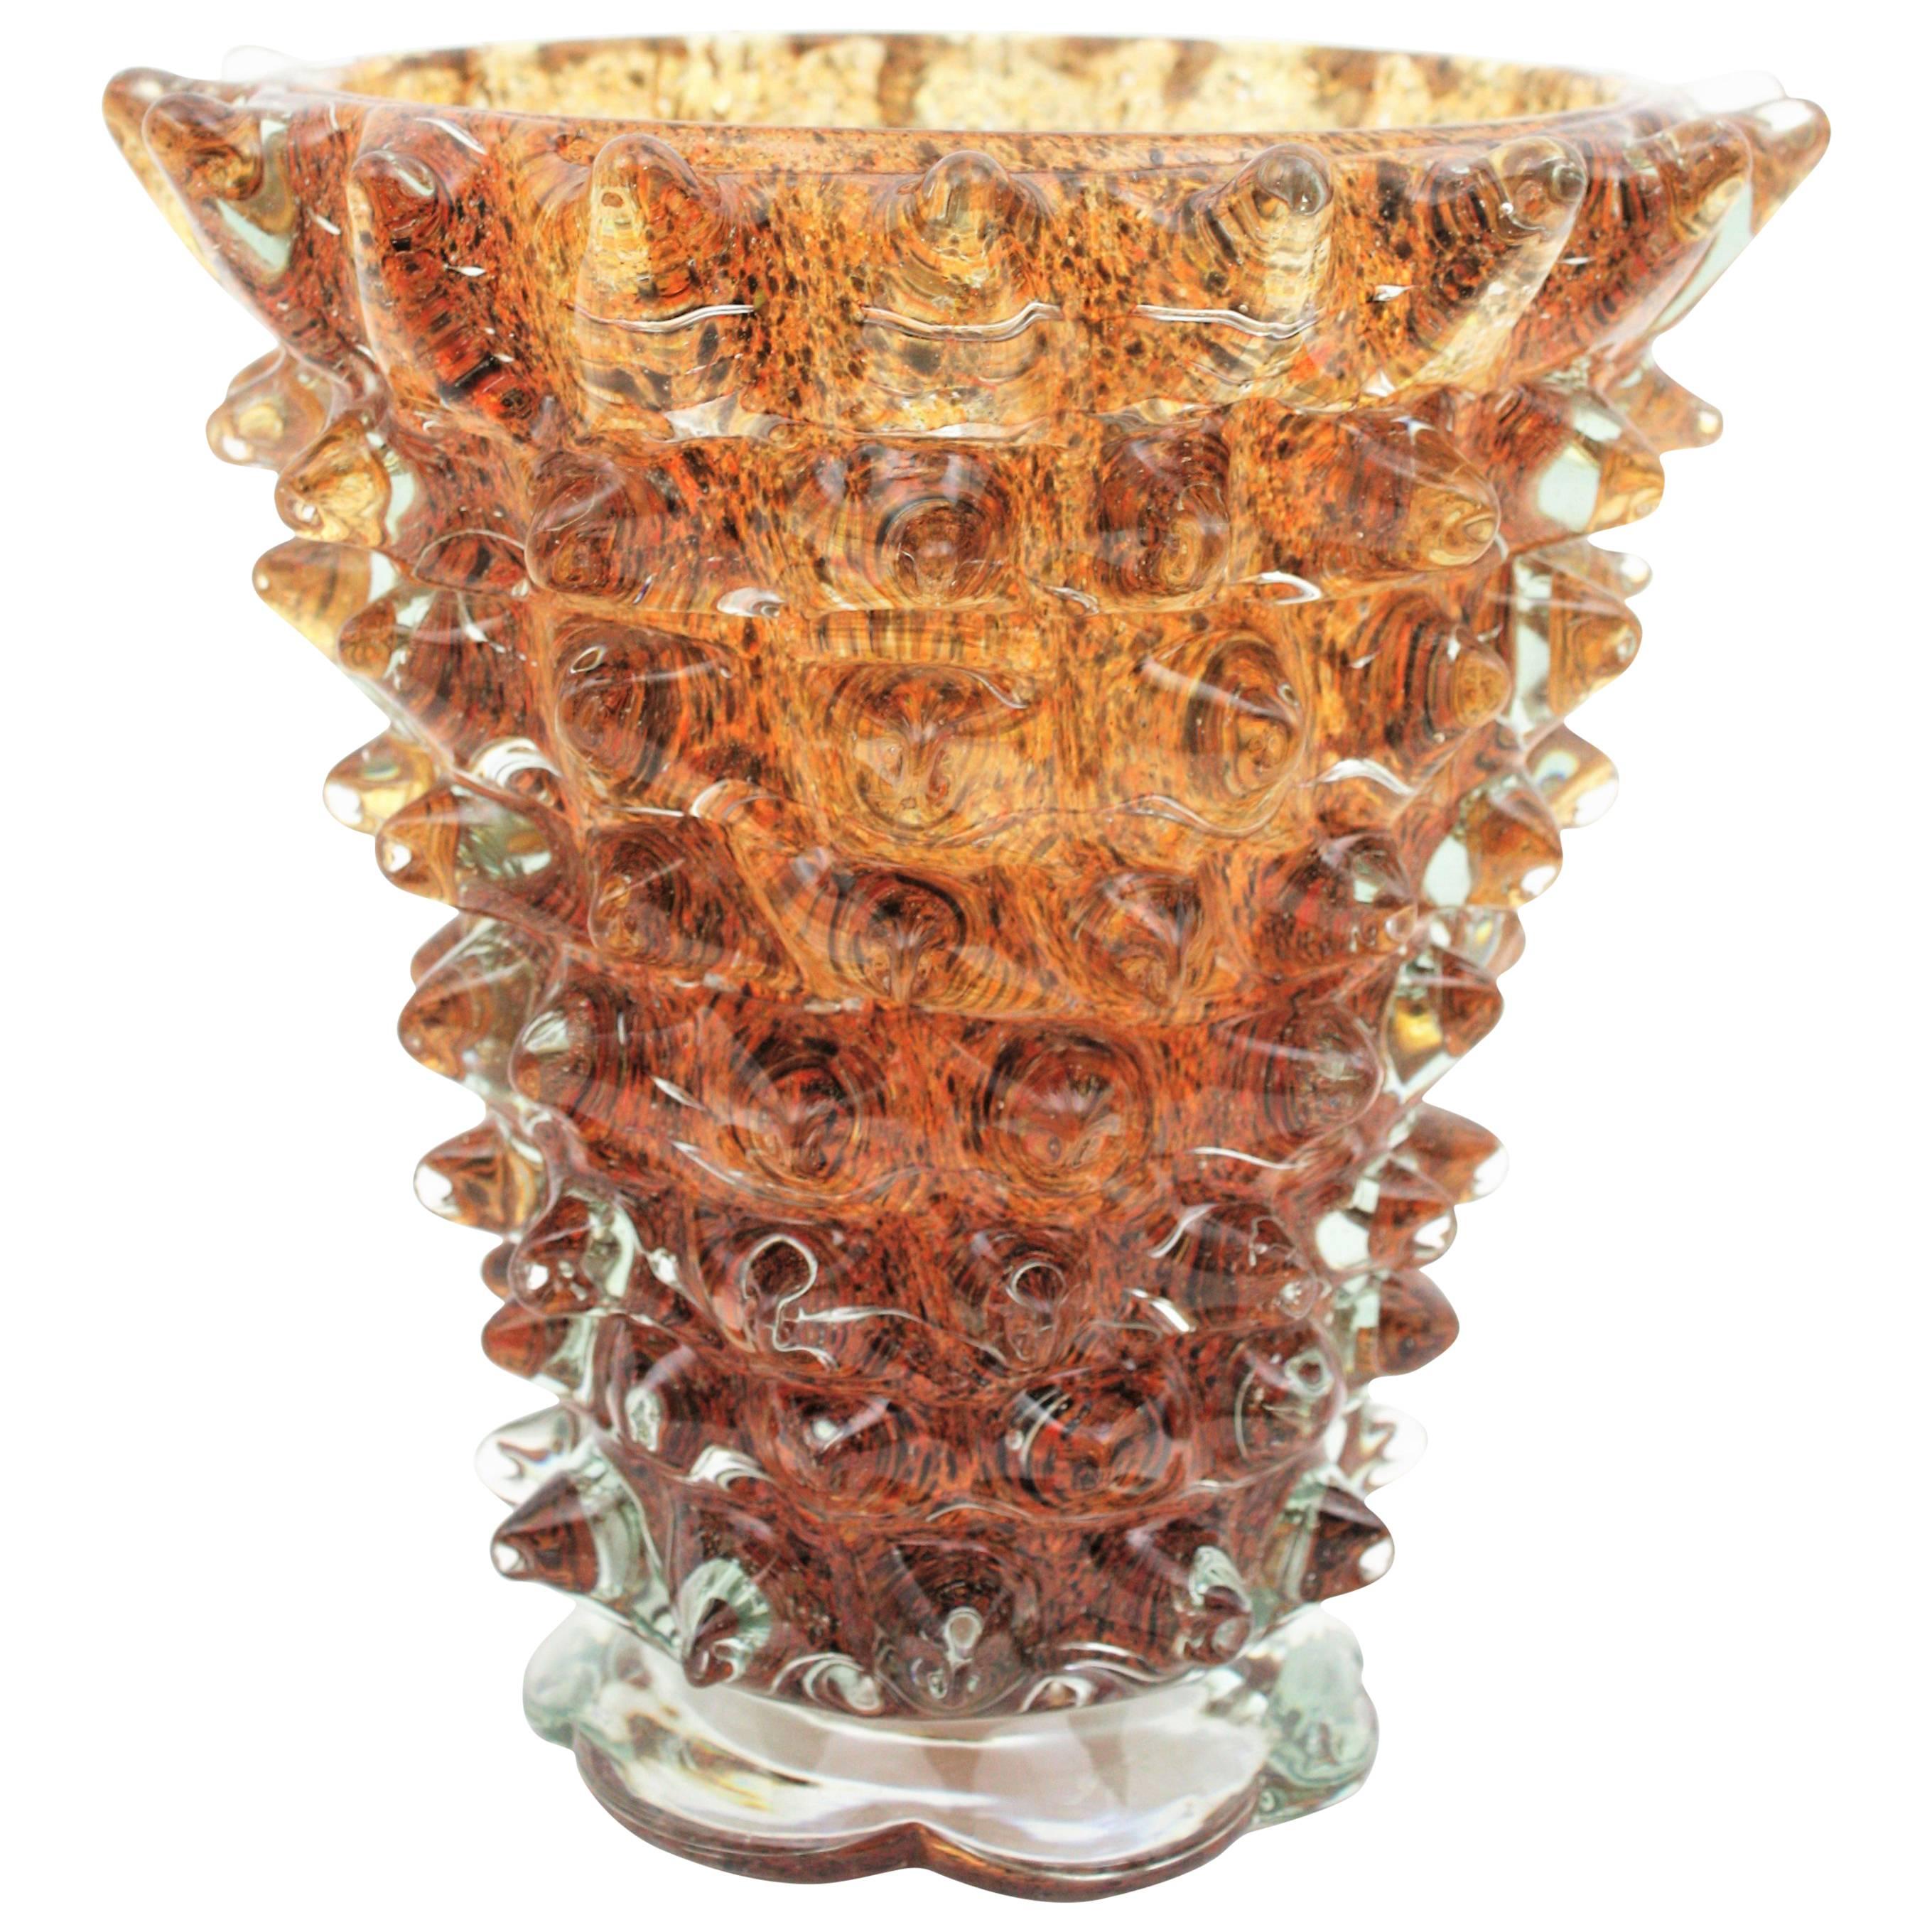 Barovier e Toso Murano amber and brown Rostrato glass vase, Italy, 1930s
A monumental Art Deco amber Murano art glass vase made with rostrato technique by Ercole Barovier for Barovier e Toso.
This piece, unusual in this amber color has millions of